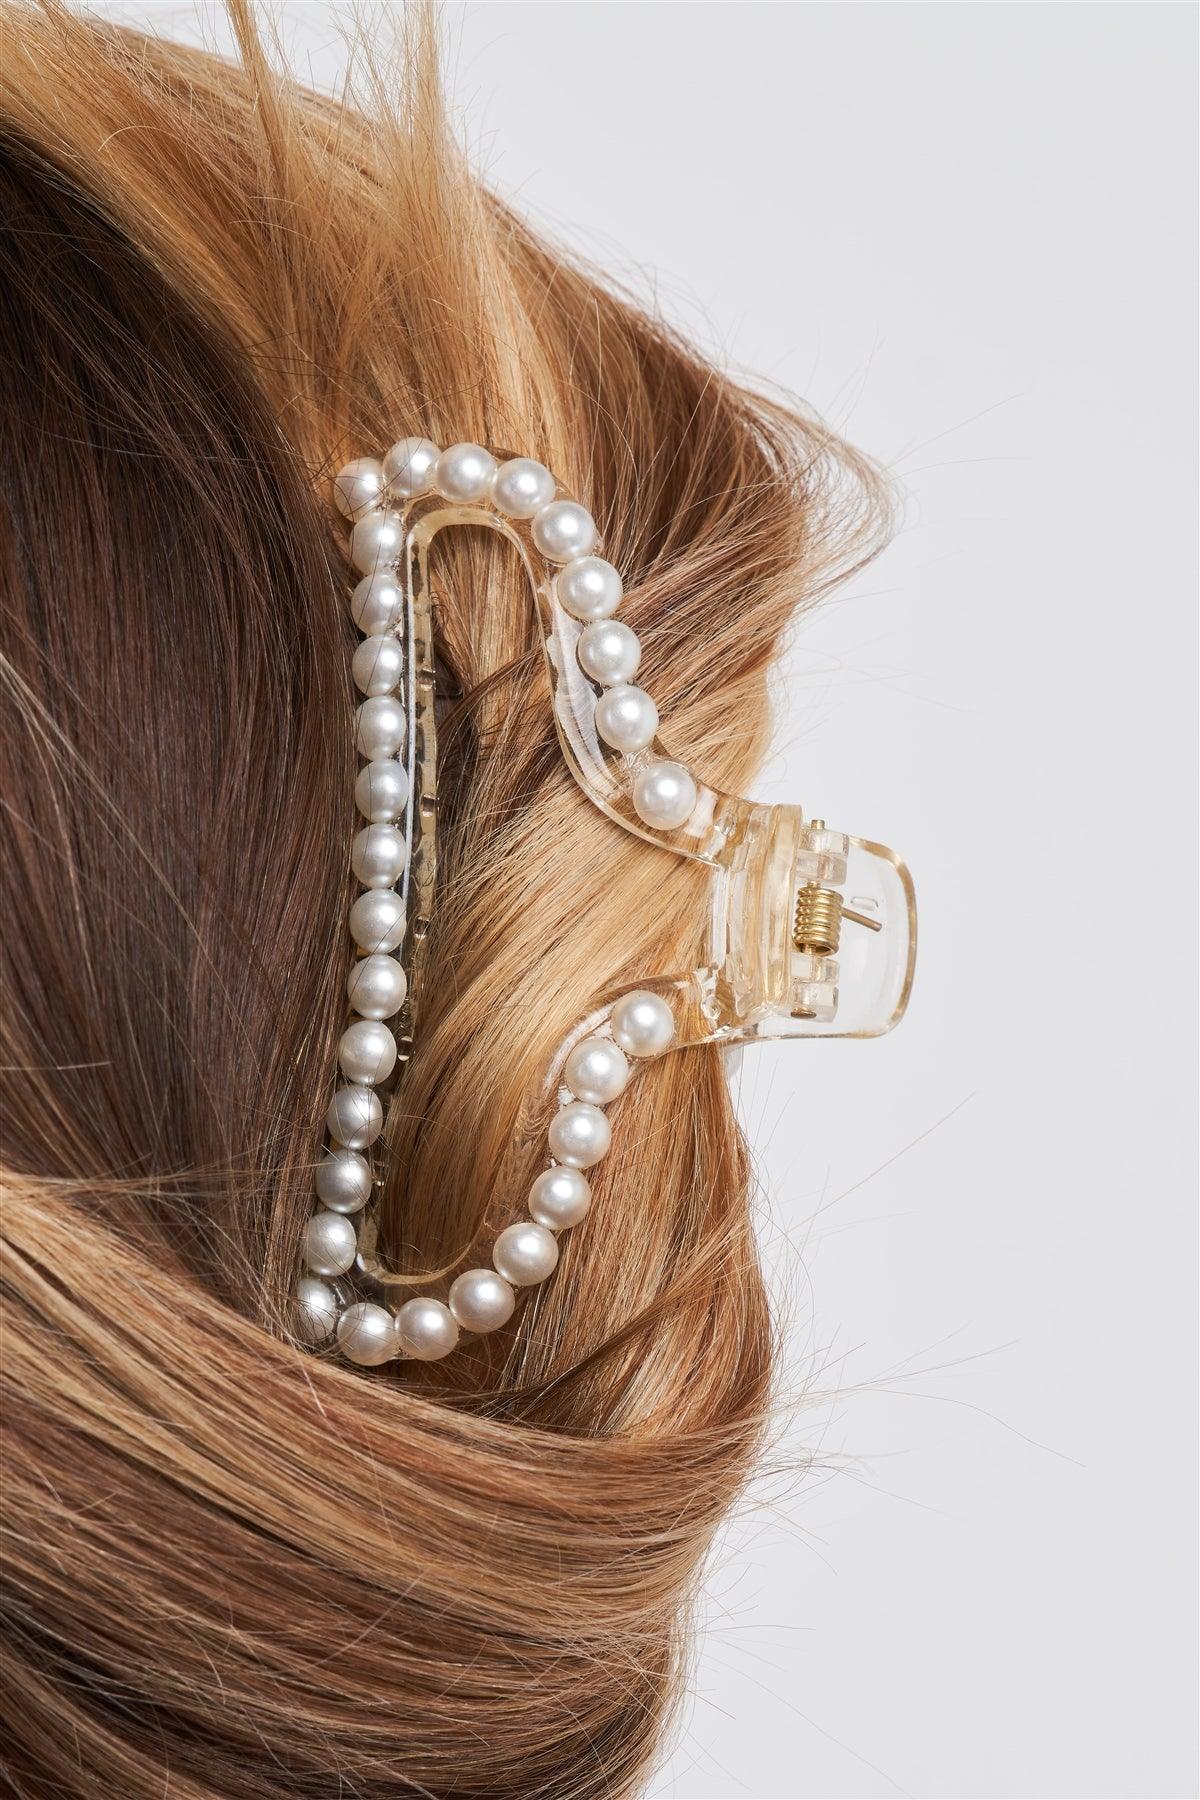 "Mermaid Tail" White & Pearl Large Hair Clip /3 Pieces